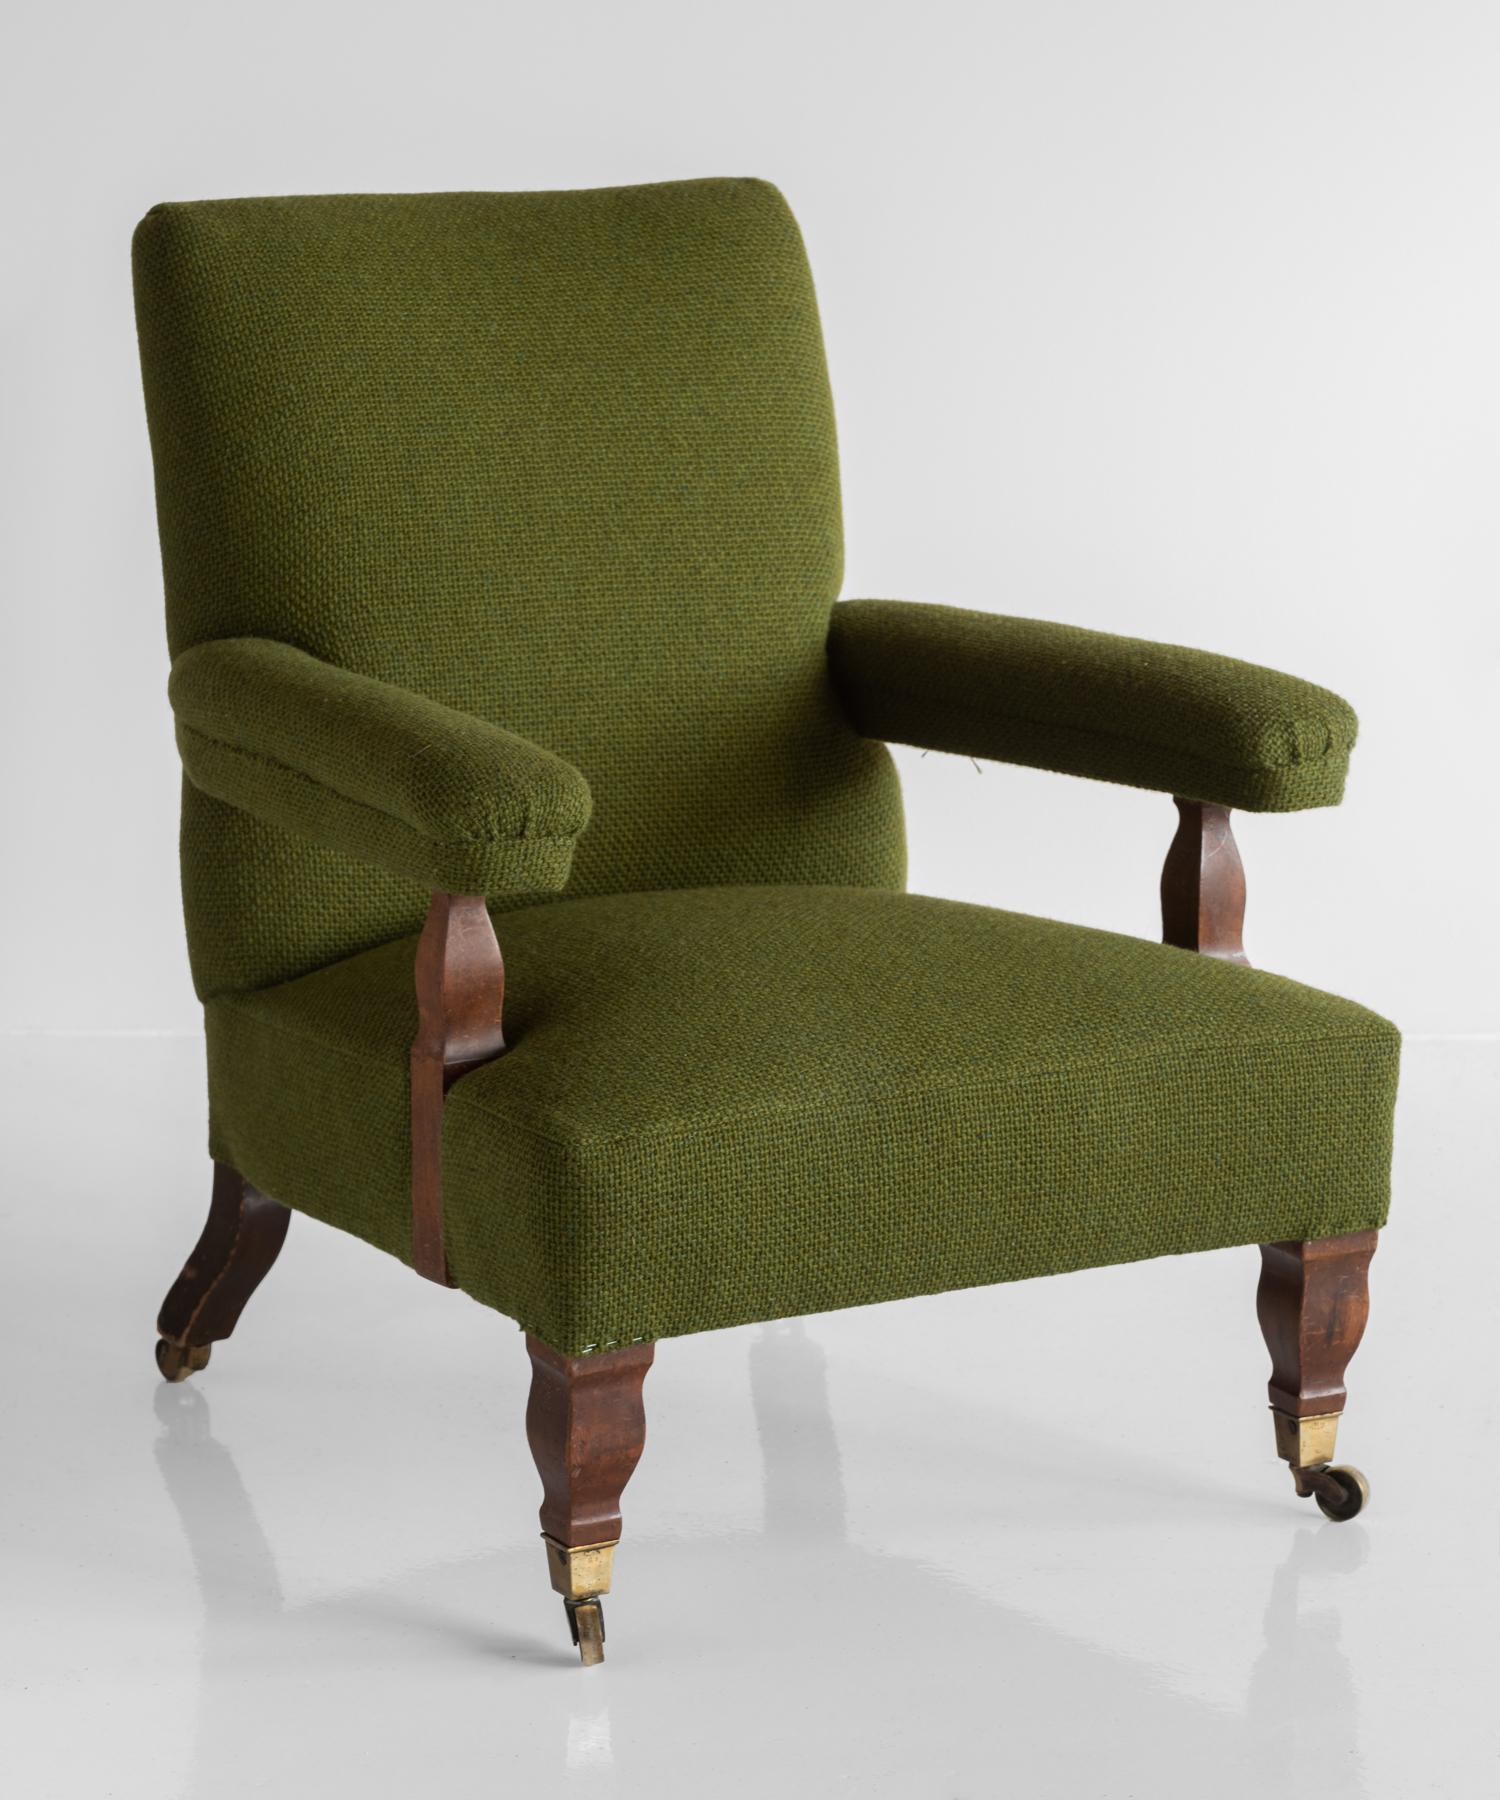 Connaught upholstered armchair, England, circa 1890.

Handsome frame on original brass castors. Newly upholstered in olive green wool super weave by Maharam.